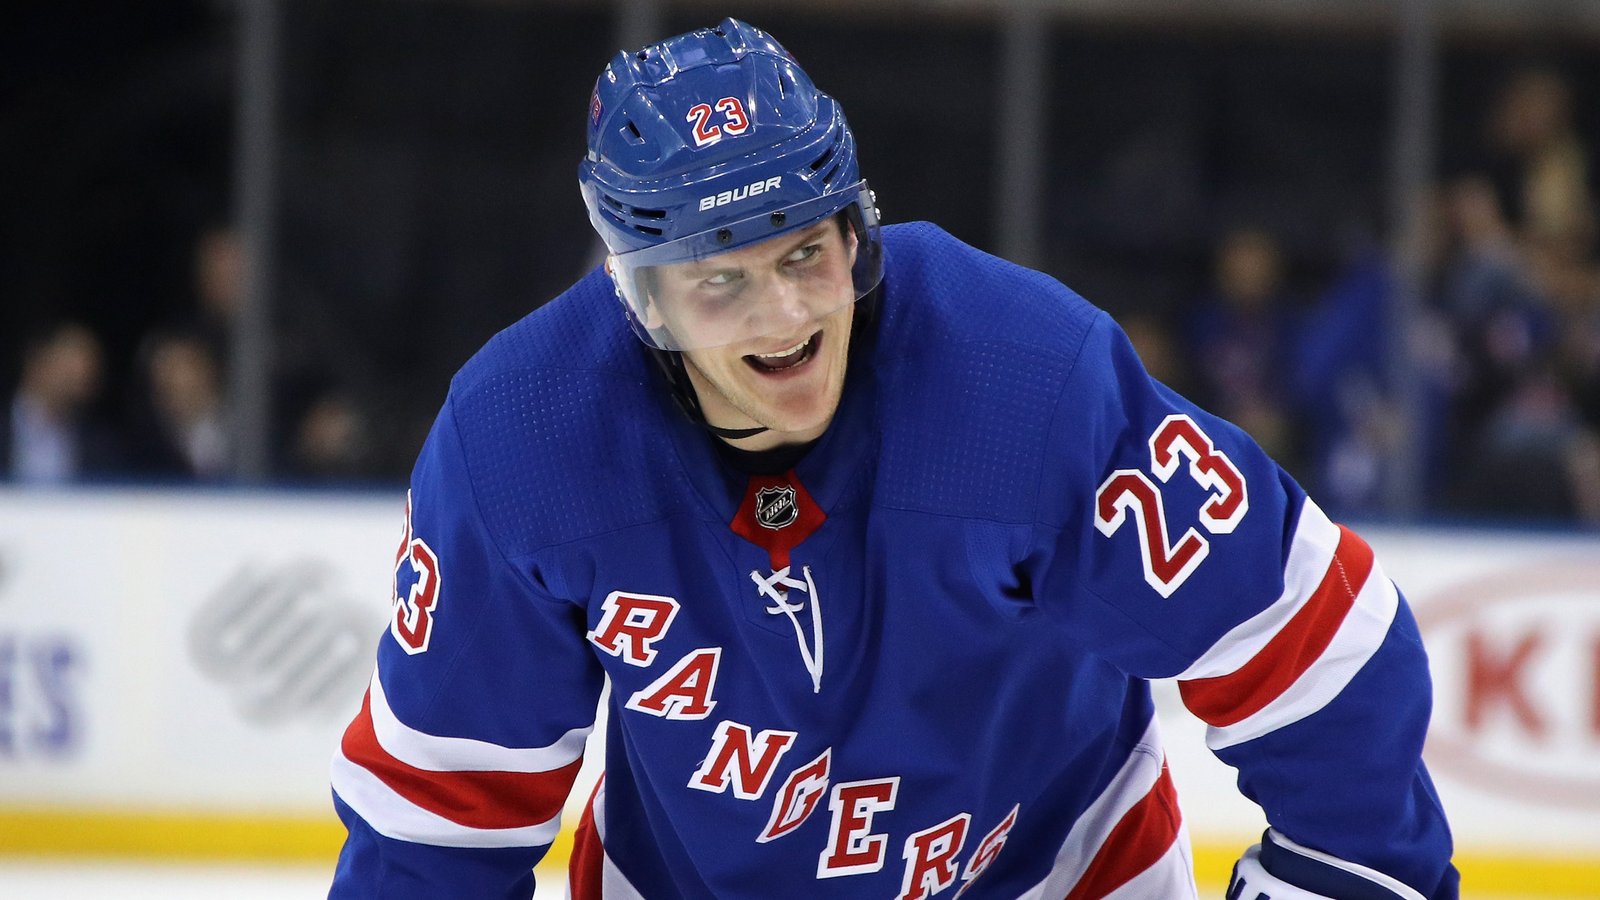 Rangers’ Fox with ruthless move before puck drop vs. Islanders 